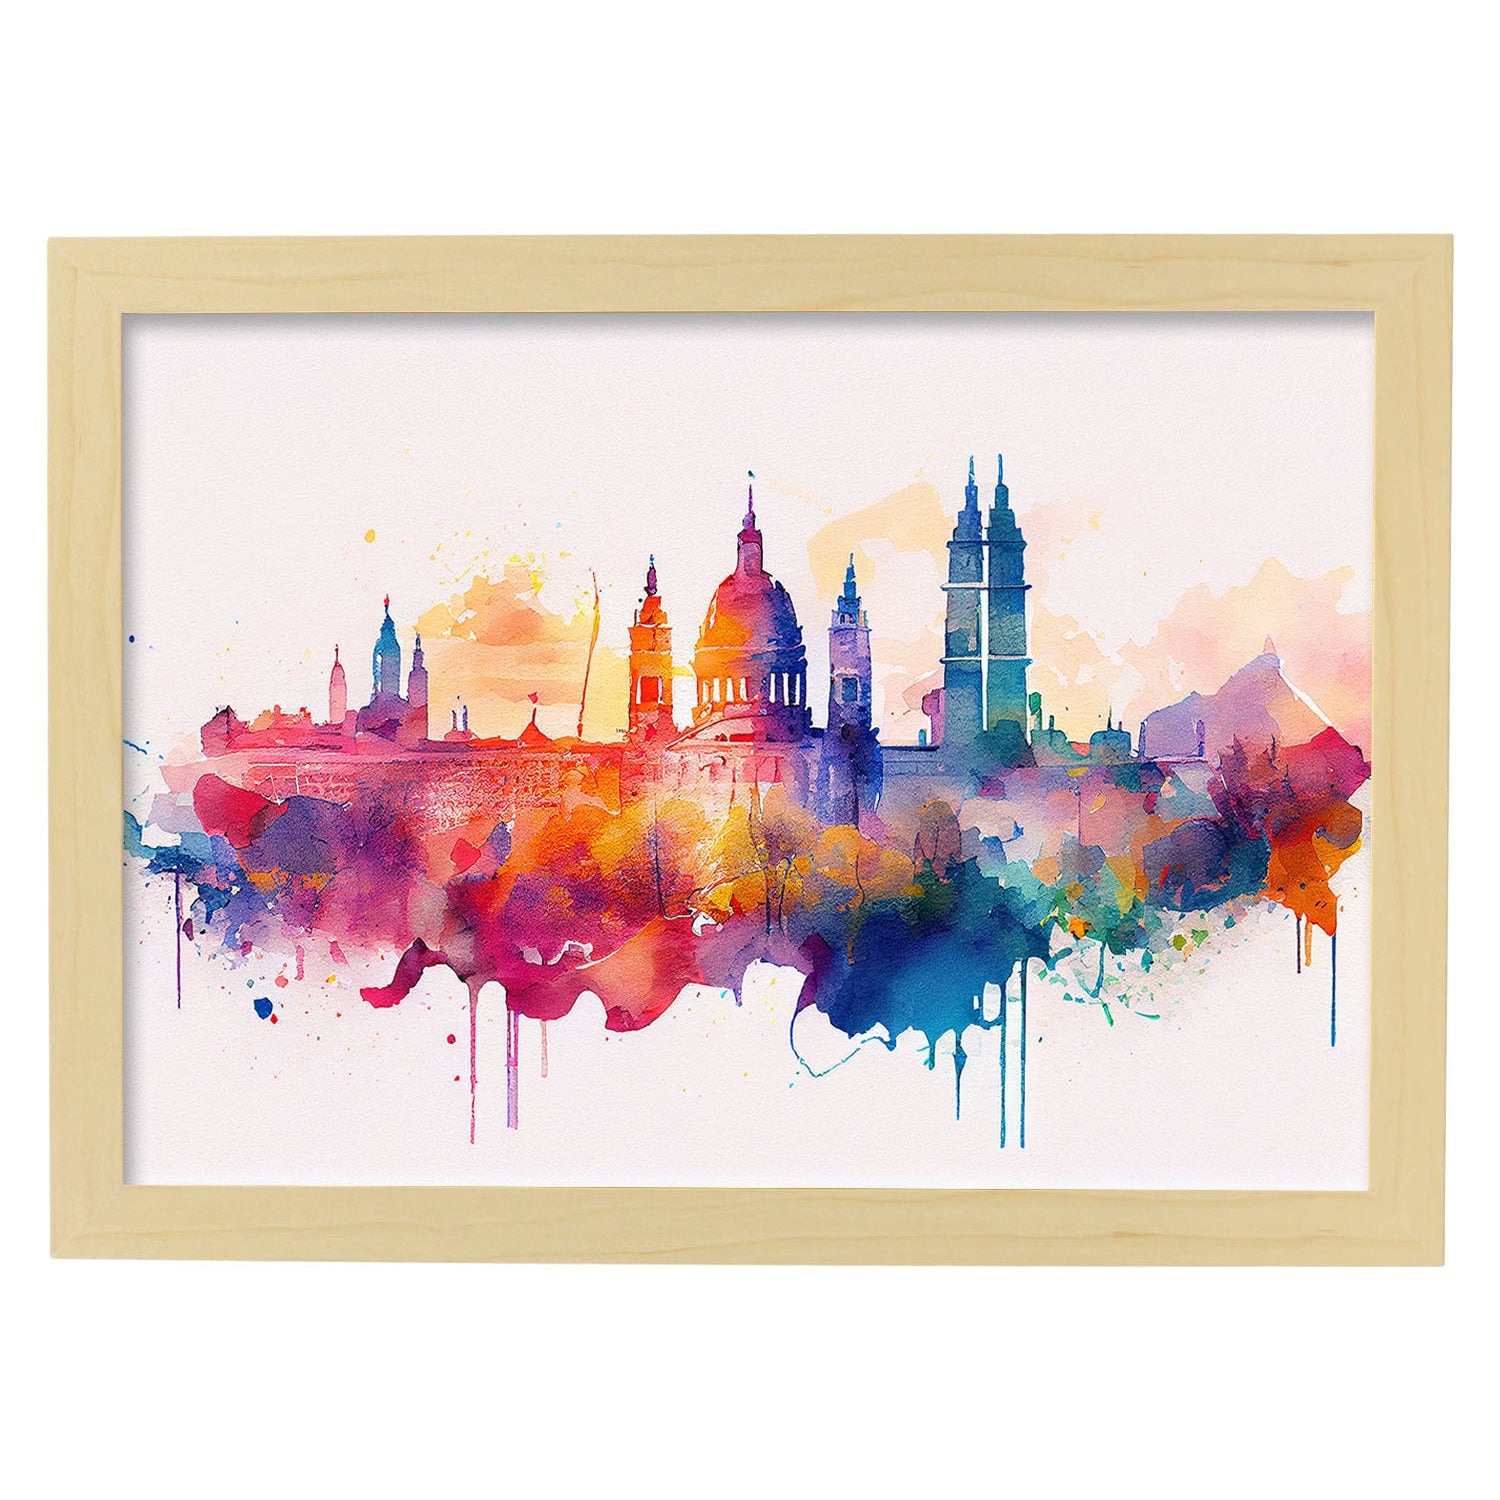 Nacnic watercolor of a skyline of the city of Madrid_4. Aesthetic Wall Art Prints for Bedroom or Living Room Design.-Artwork-Nacnic-A4-Marco Madera Clara-Nacnic Estudio SL